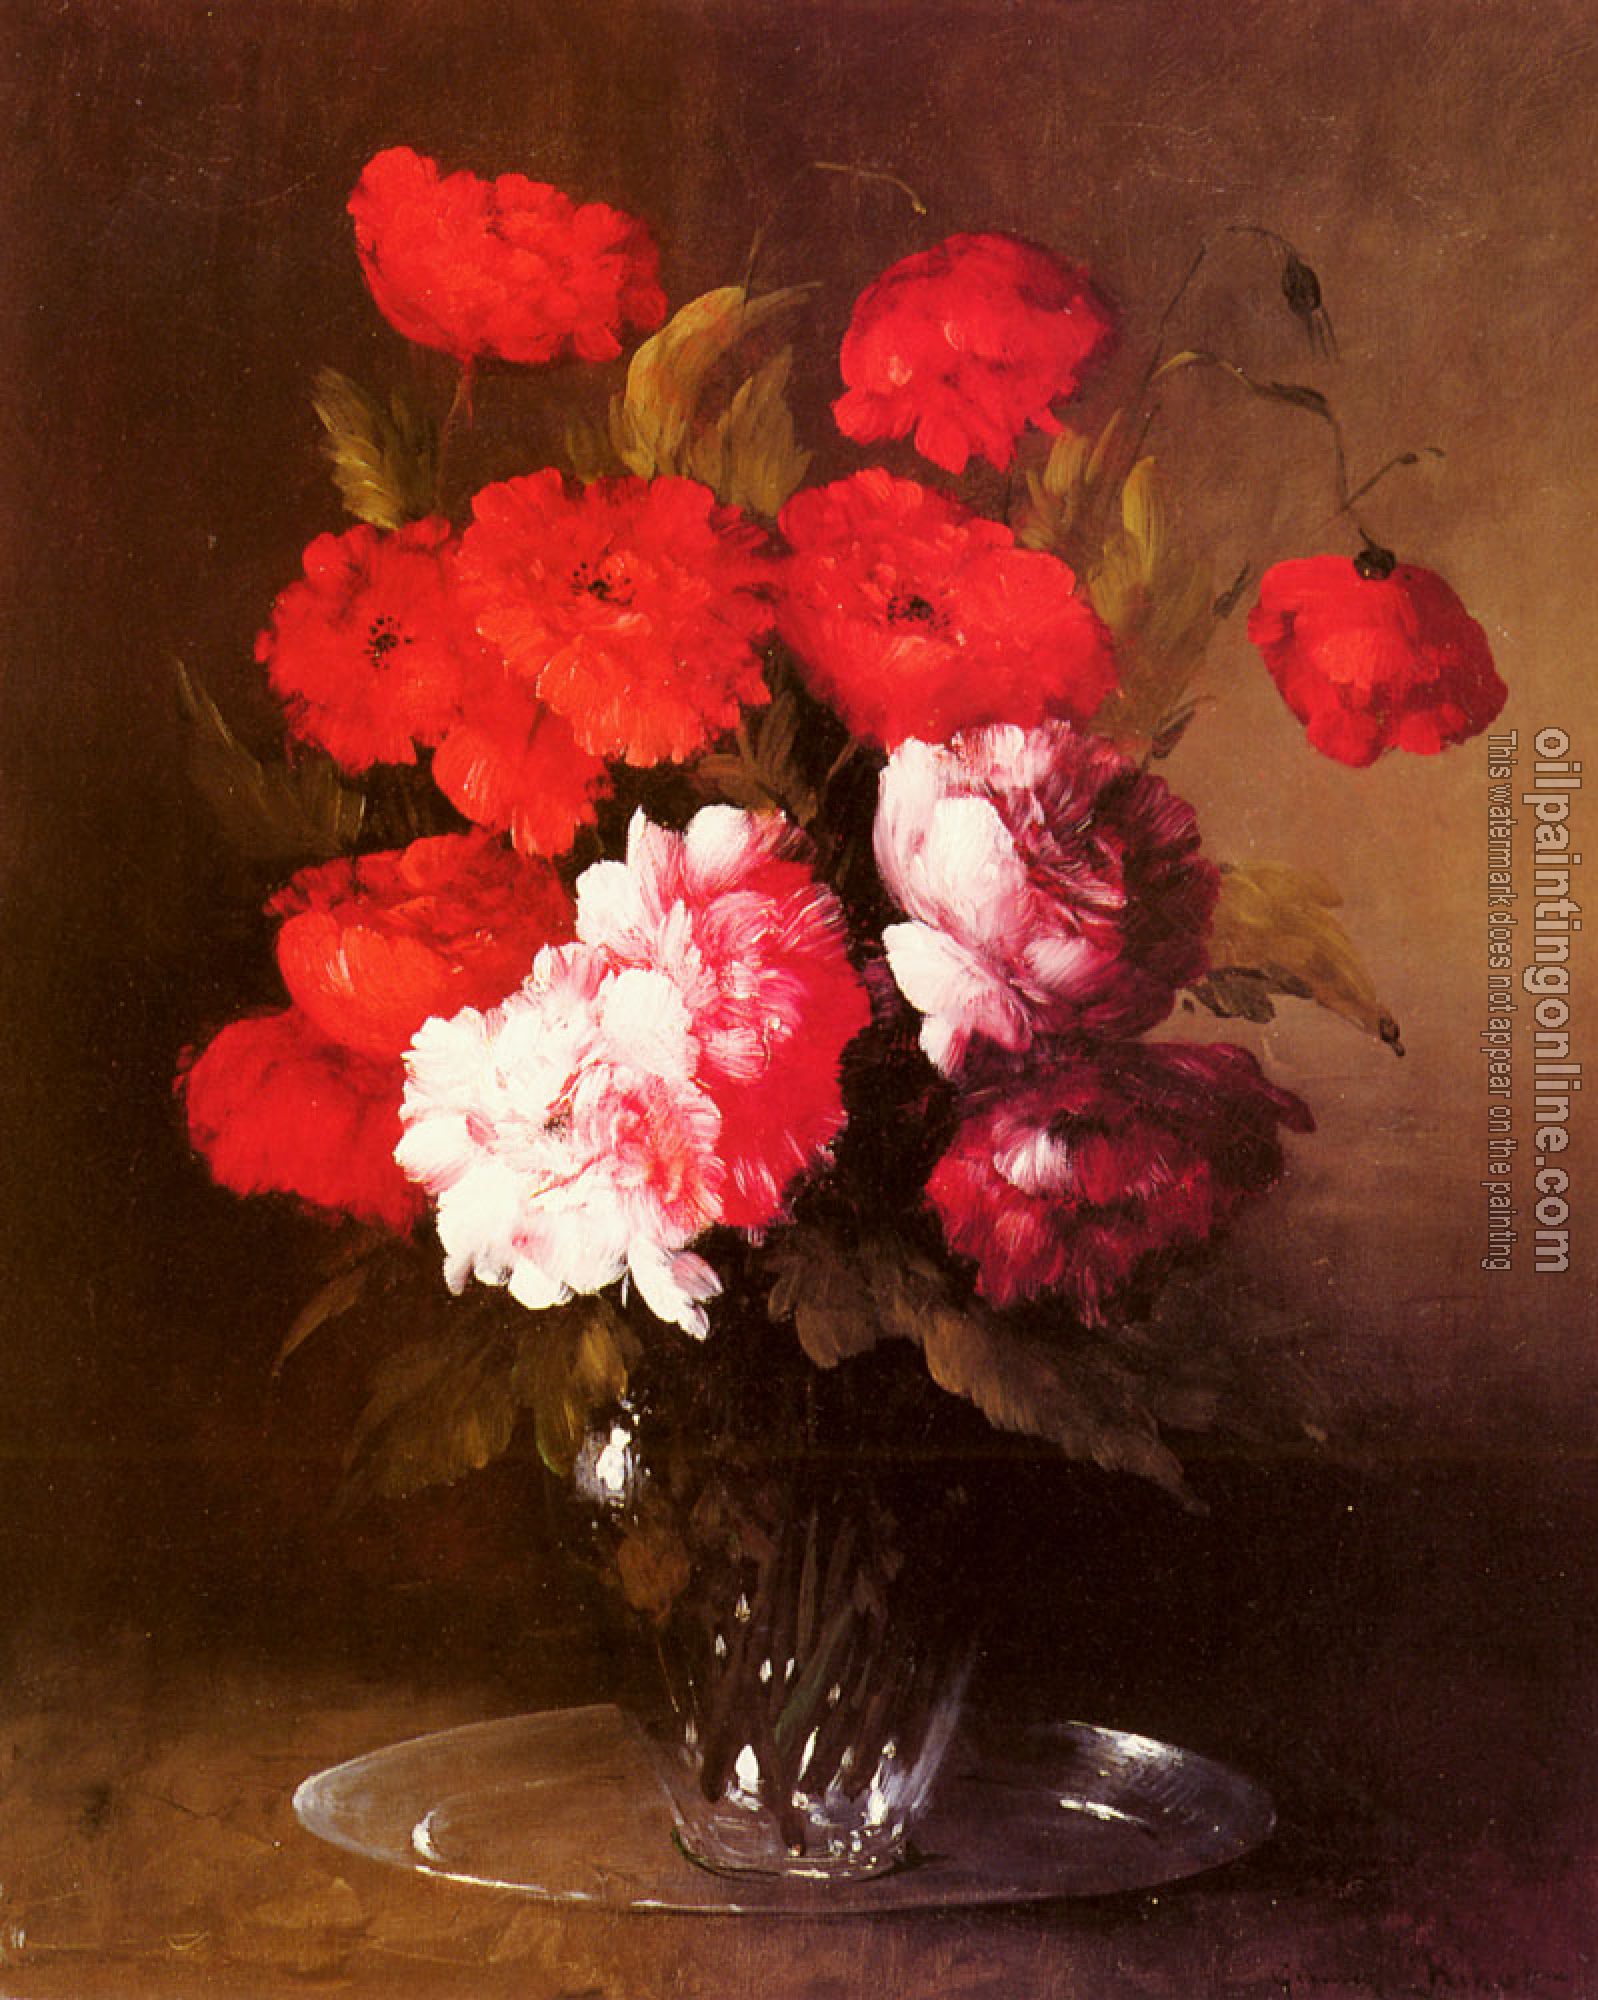 Germain Theodure Clement Ribot - Pink Peonies And Poppies In A Glass Vase